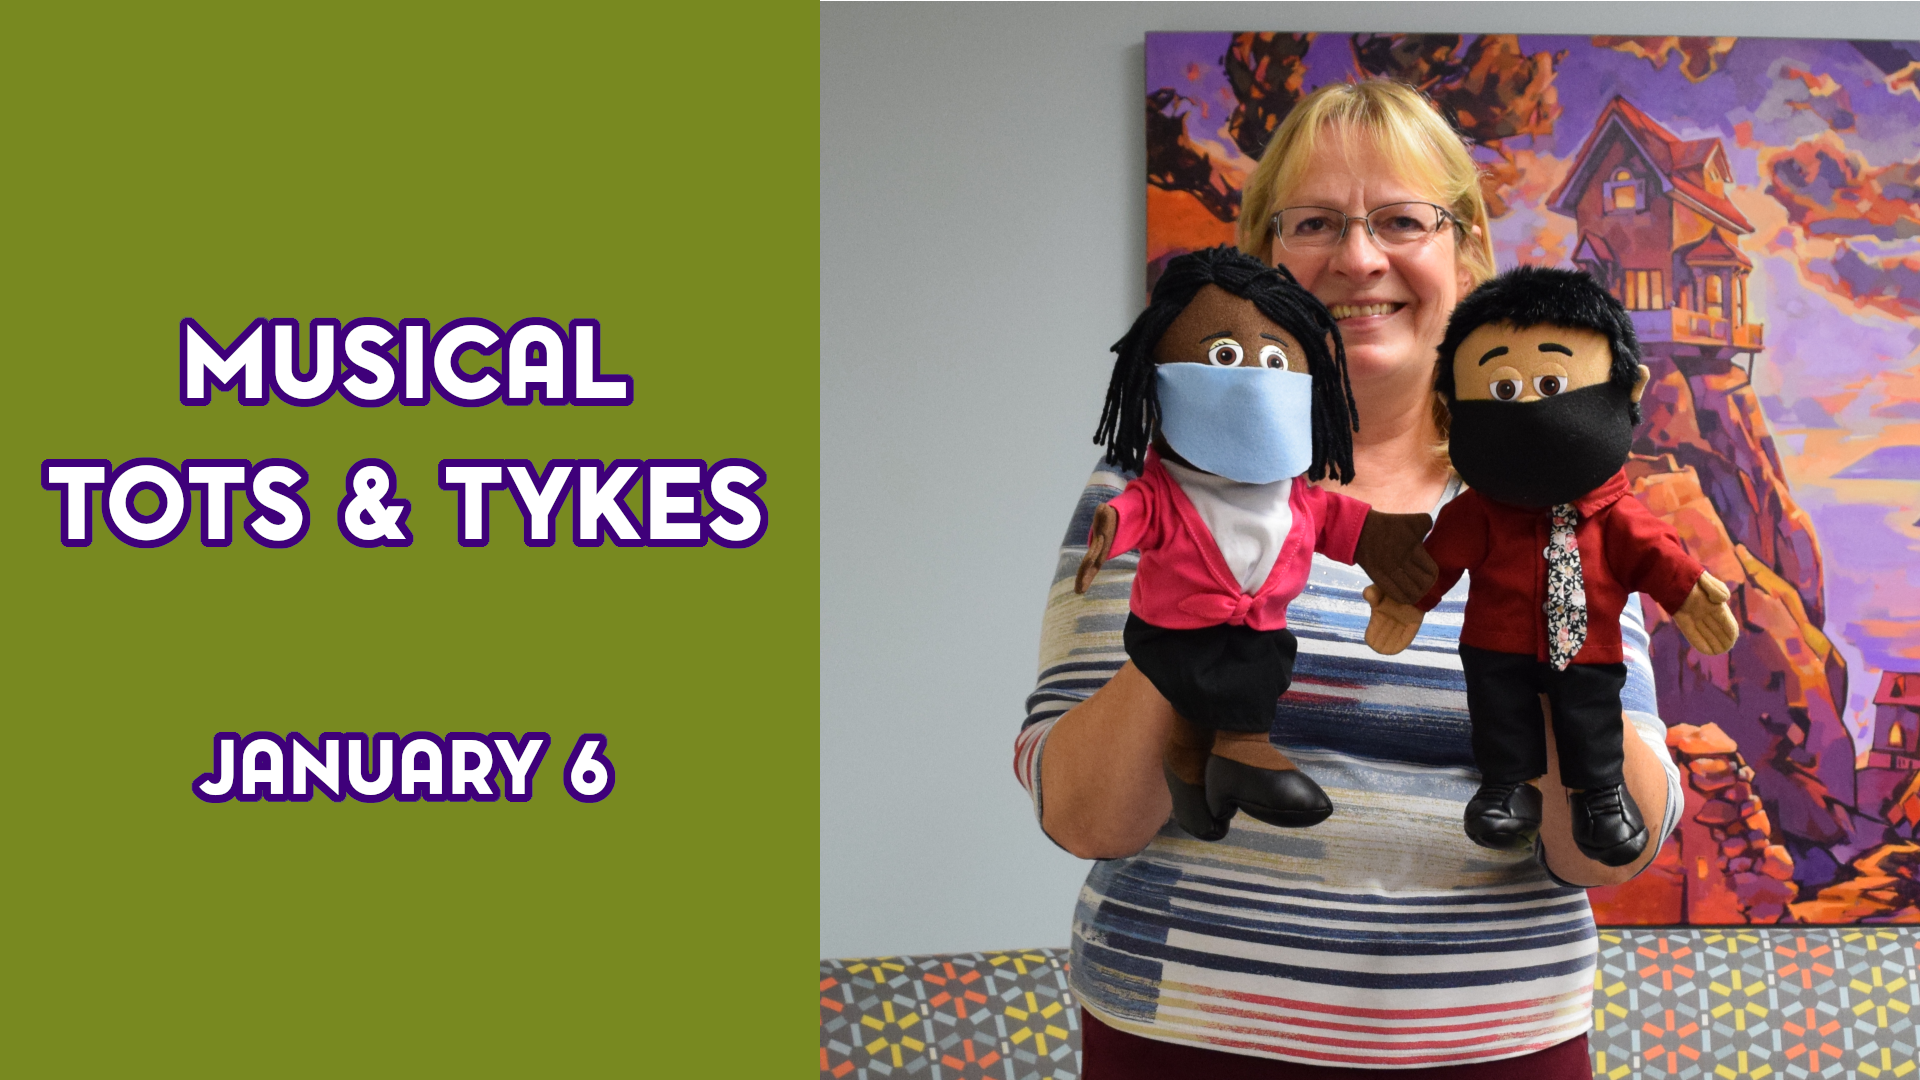 A woman holds puppets next to the text "Musical Tots & Tykes January 6"